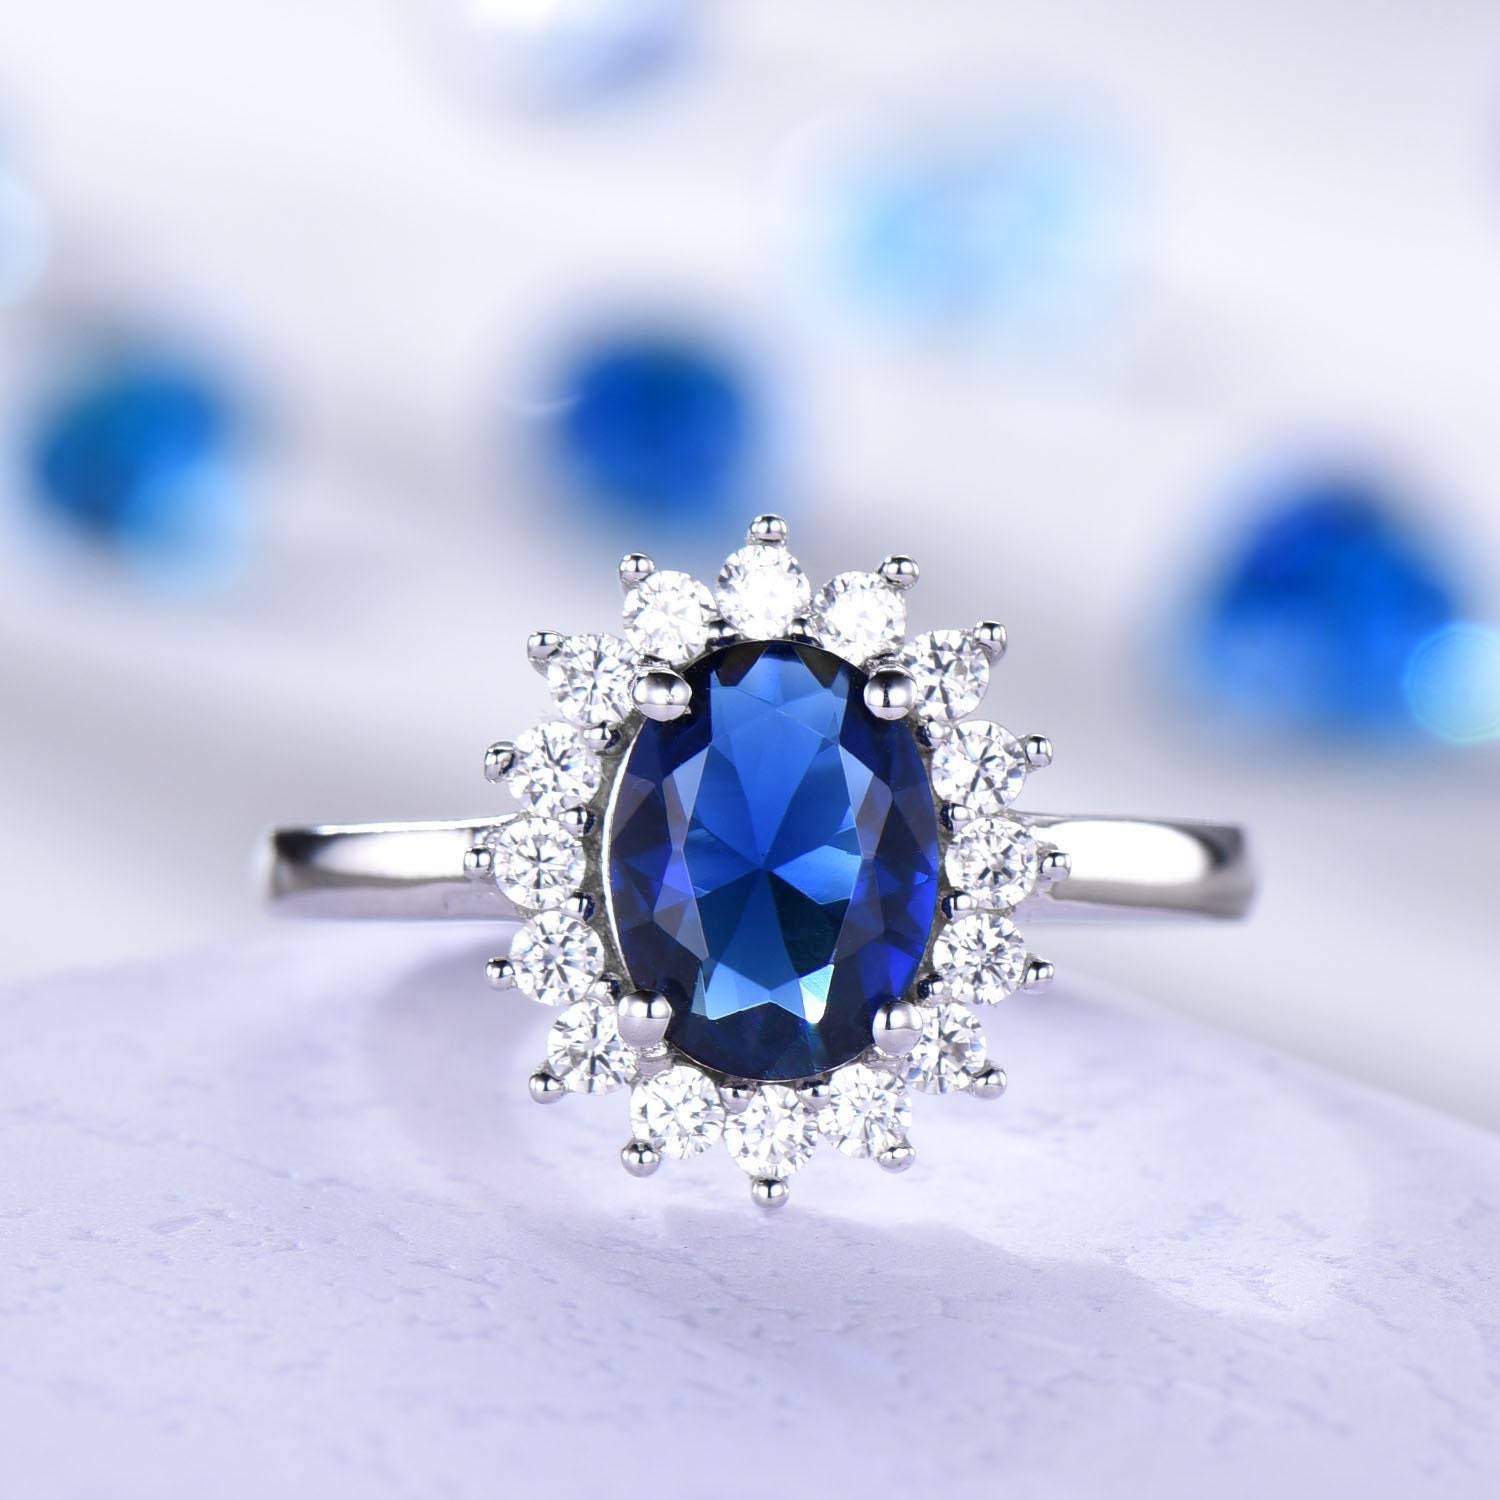 Primary image for Vintage blue sapphire ring CZ diamond exquisite engagement ring white gold band 